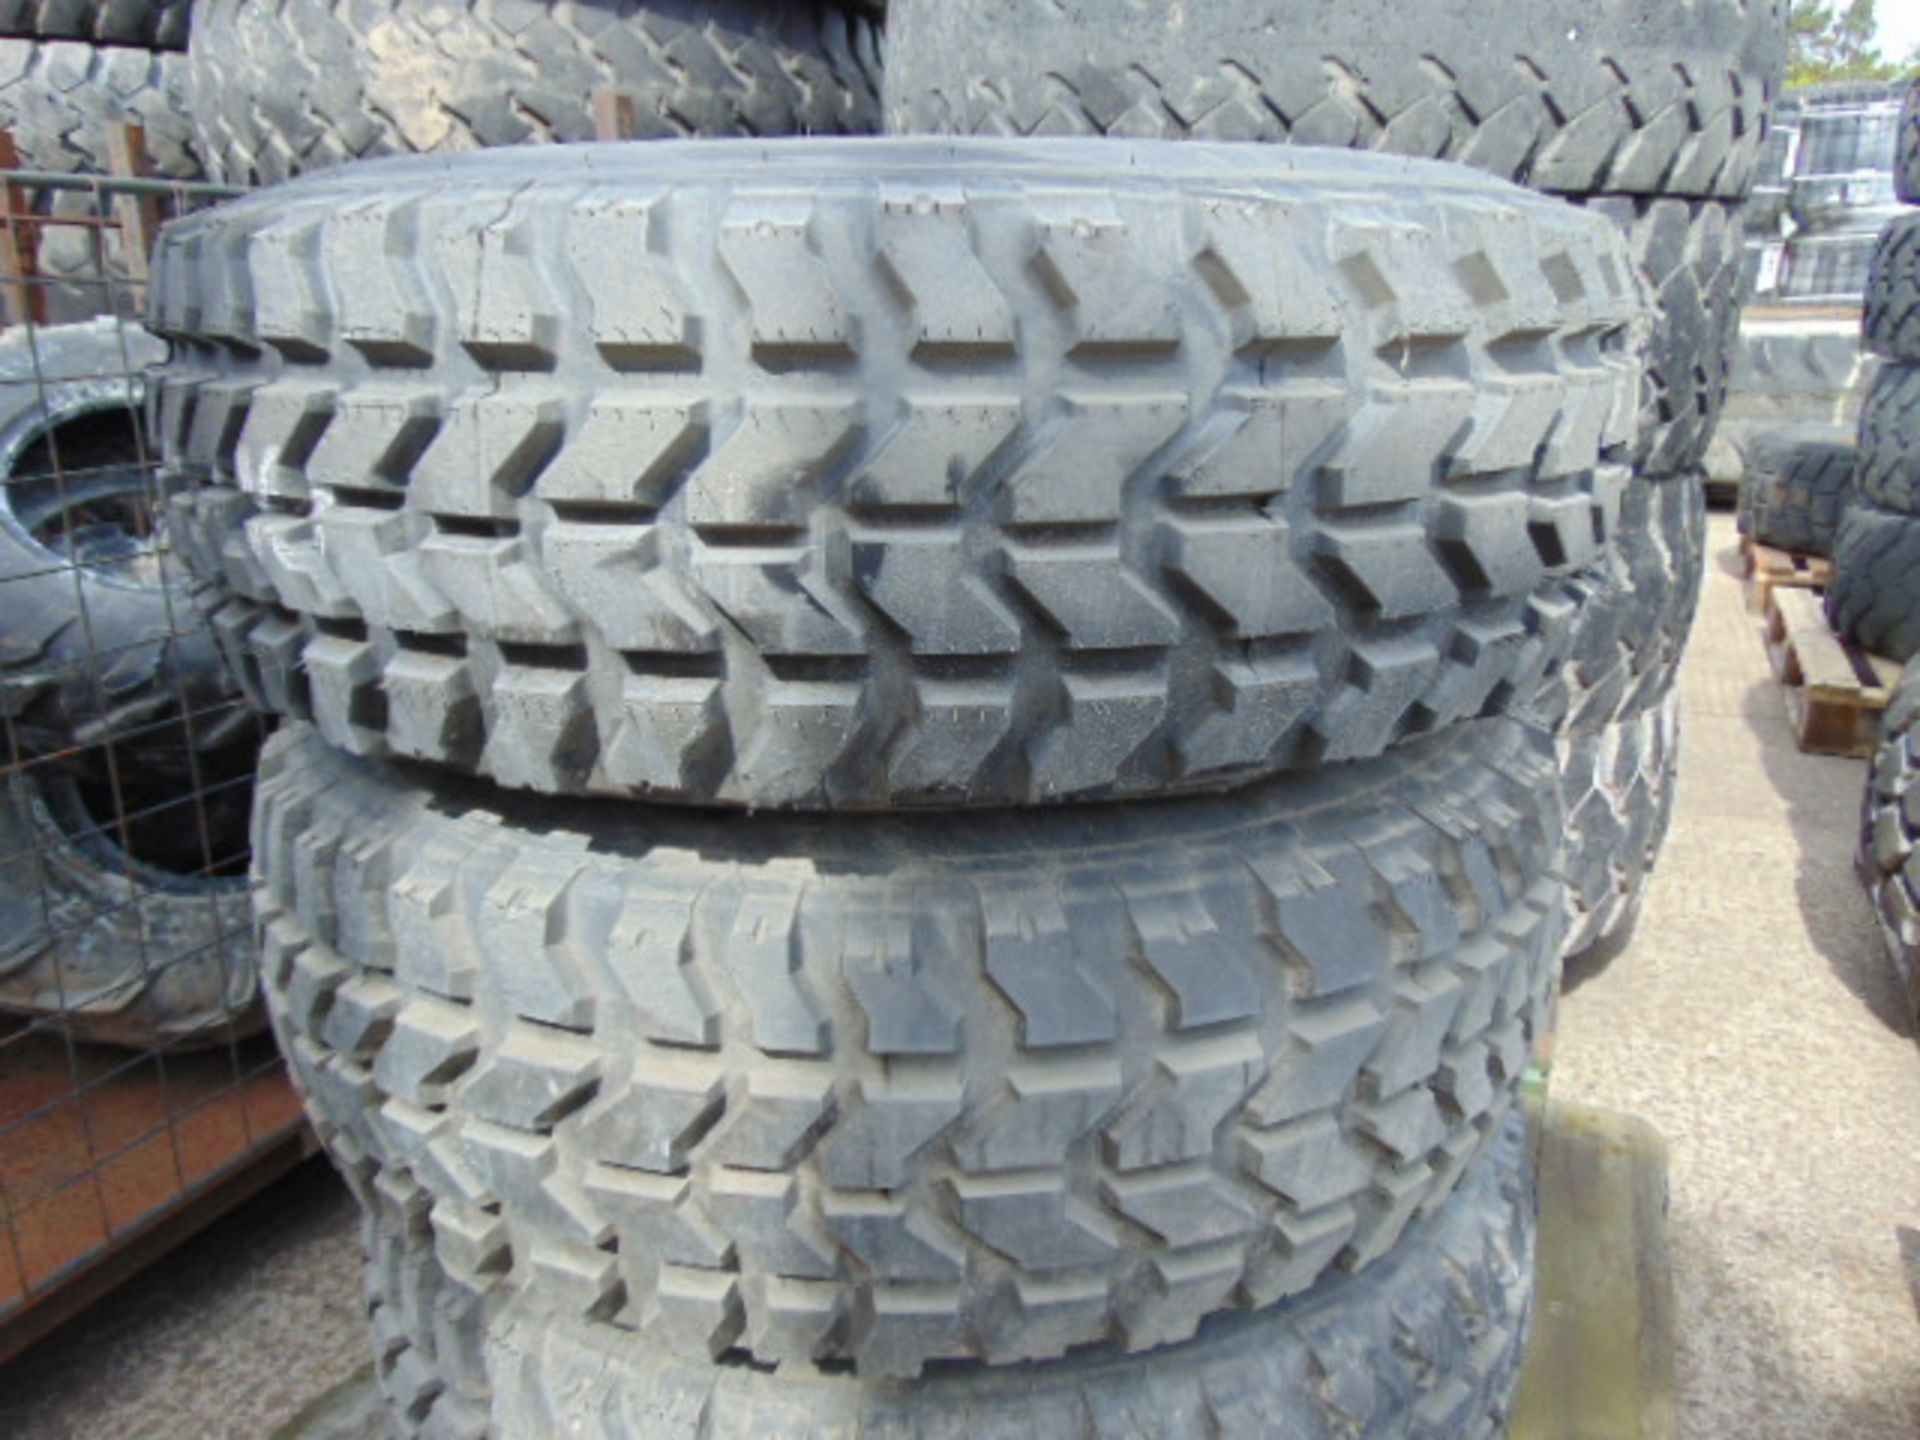 3 x Goodyear Wrangler MT 37x12.50 R16.5LT Tyres with 8 Stud Rims - Image 2 of 6